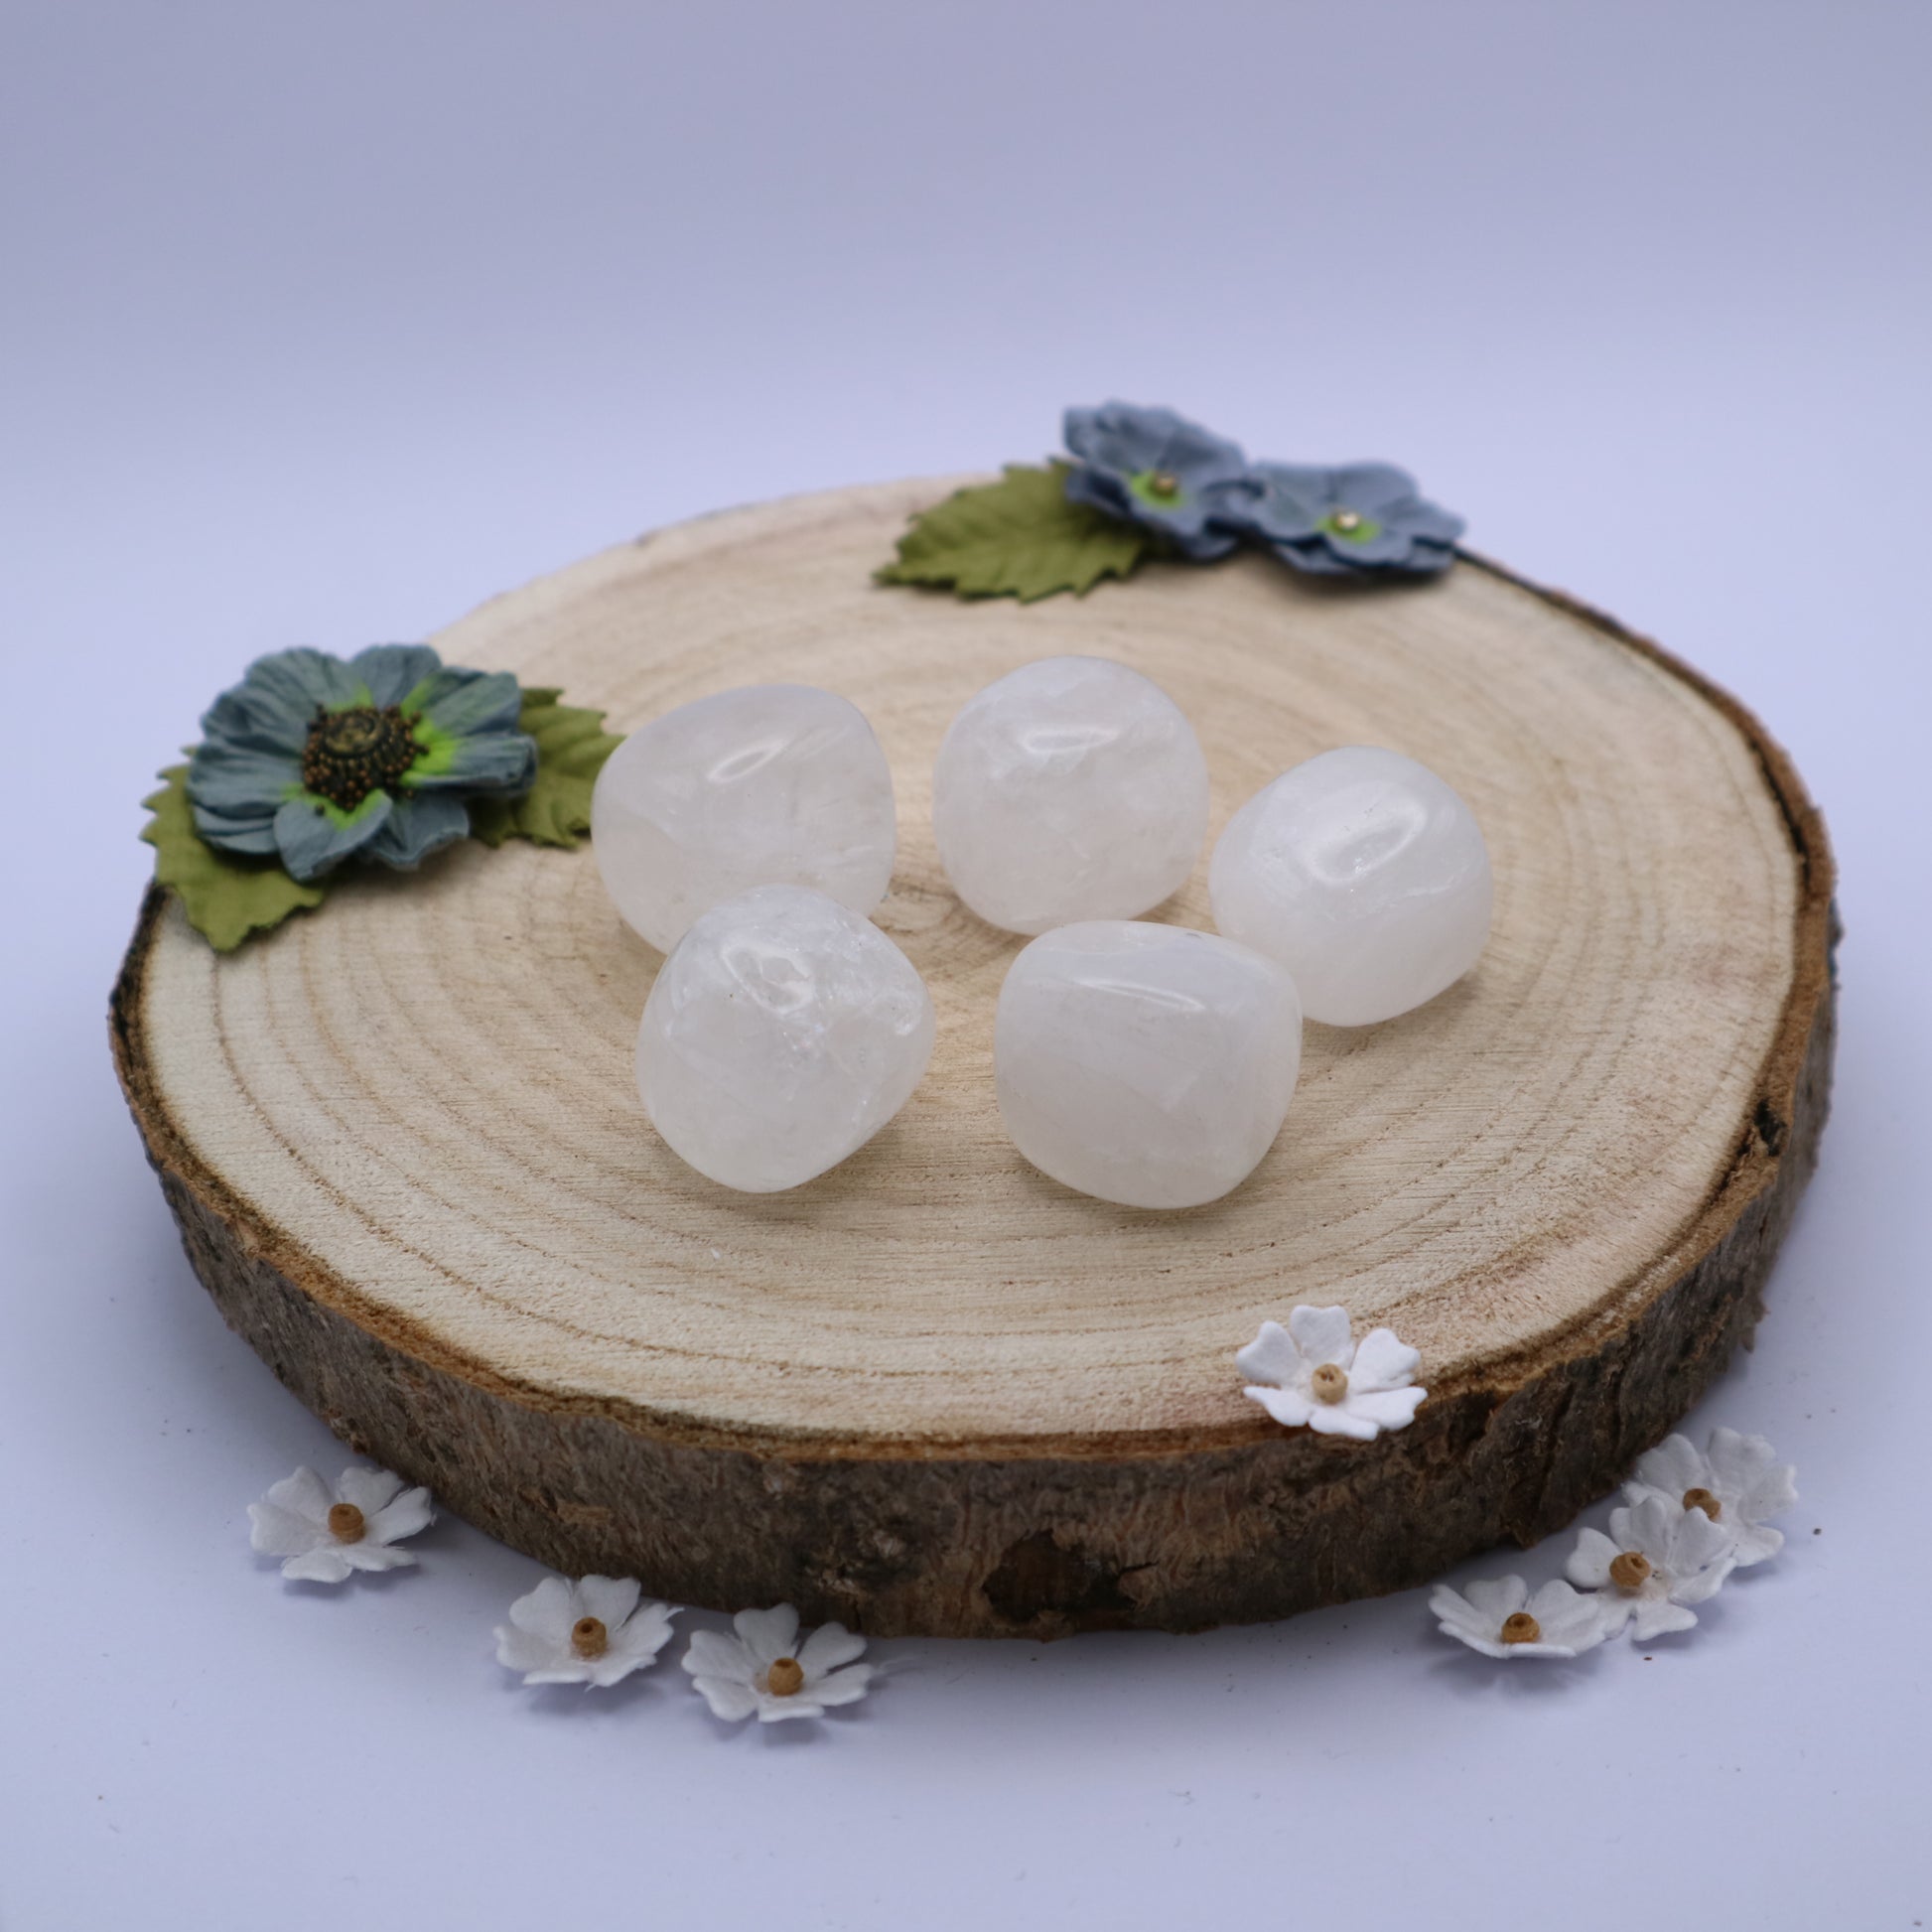 Five pieces of Snow Quartz crystals displayed on a piece of wood surrounded by flowers